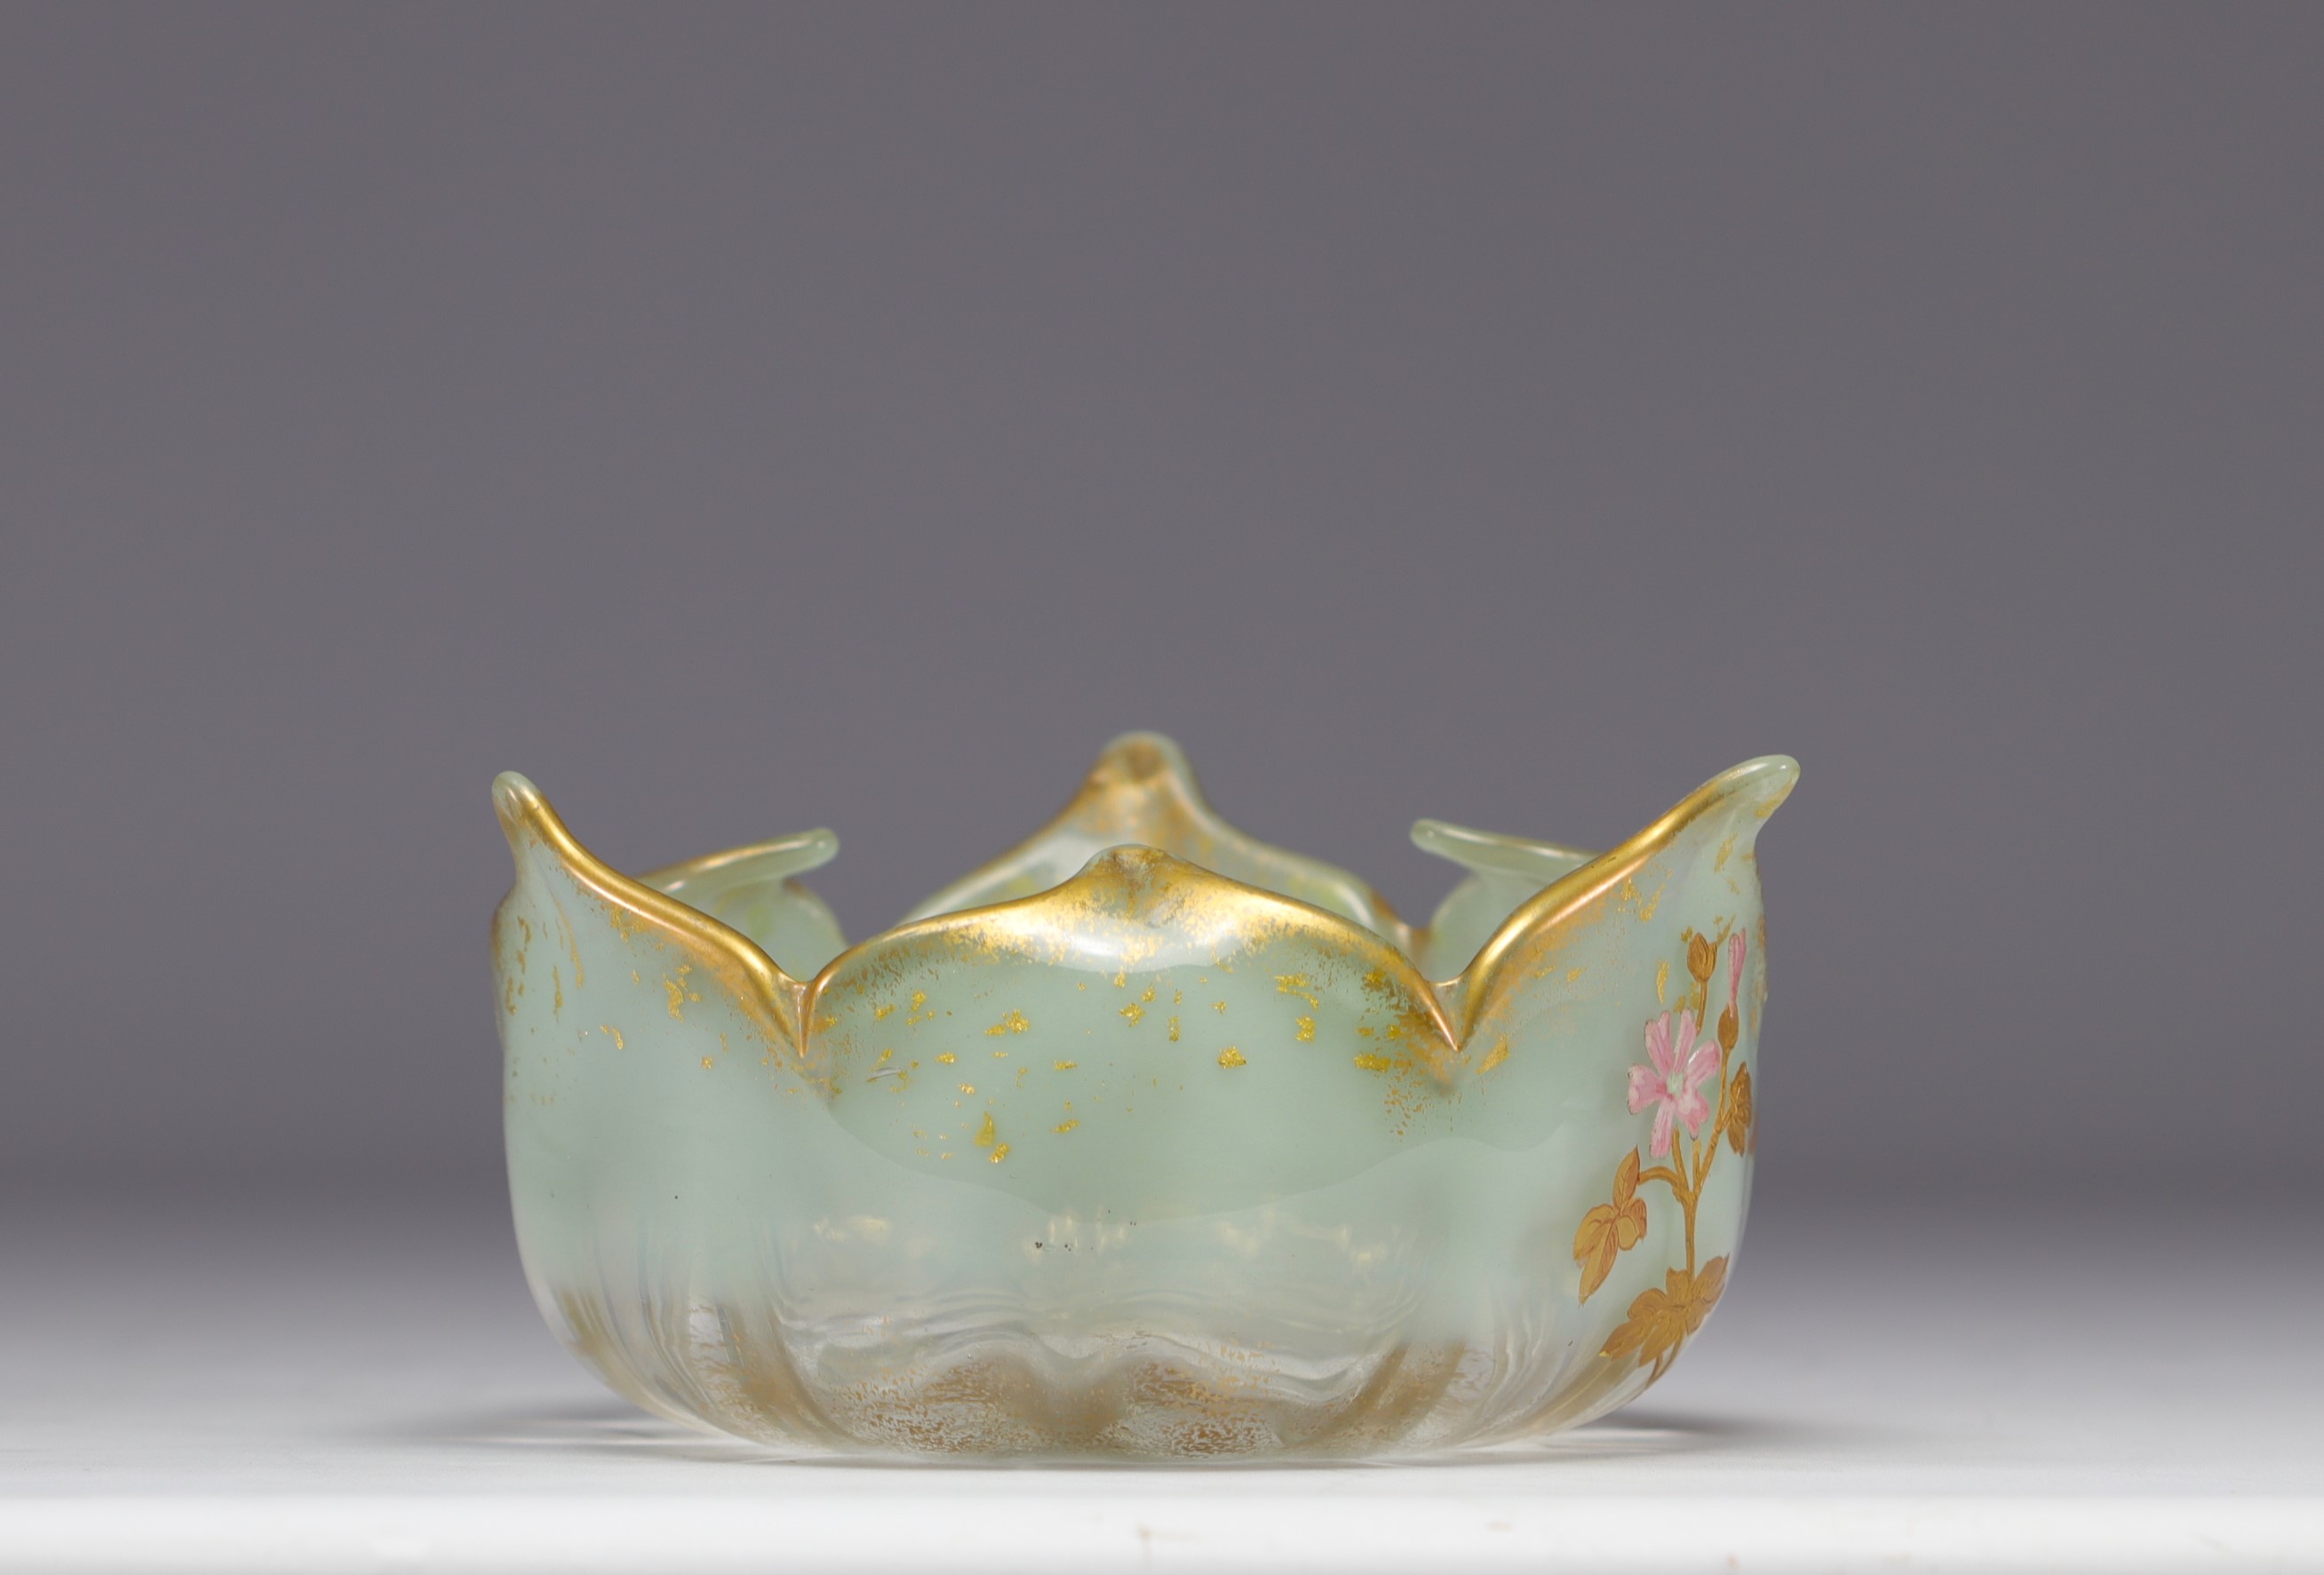 MONTJOIE, enameled three-lobed bowl with yellow and pink floral design on a green water background. - Image 3 of 3